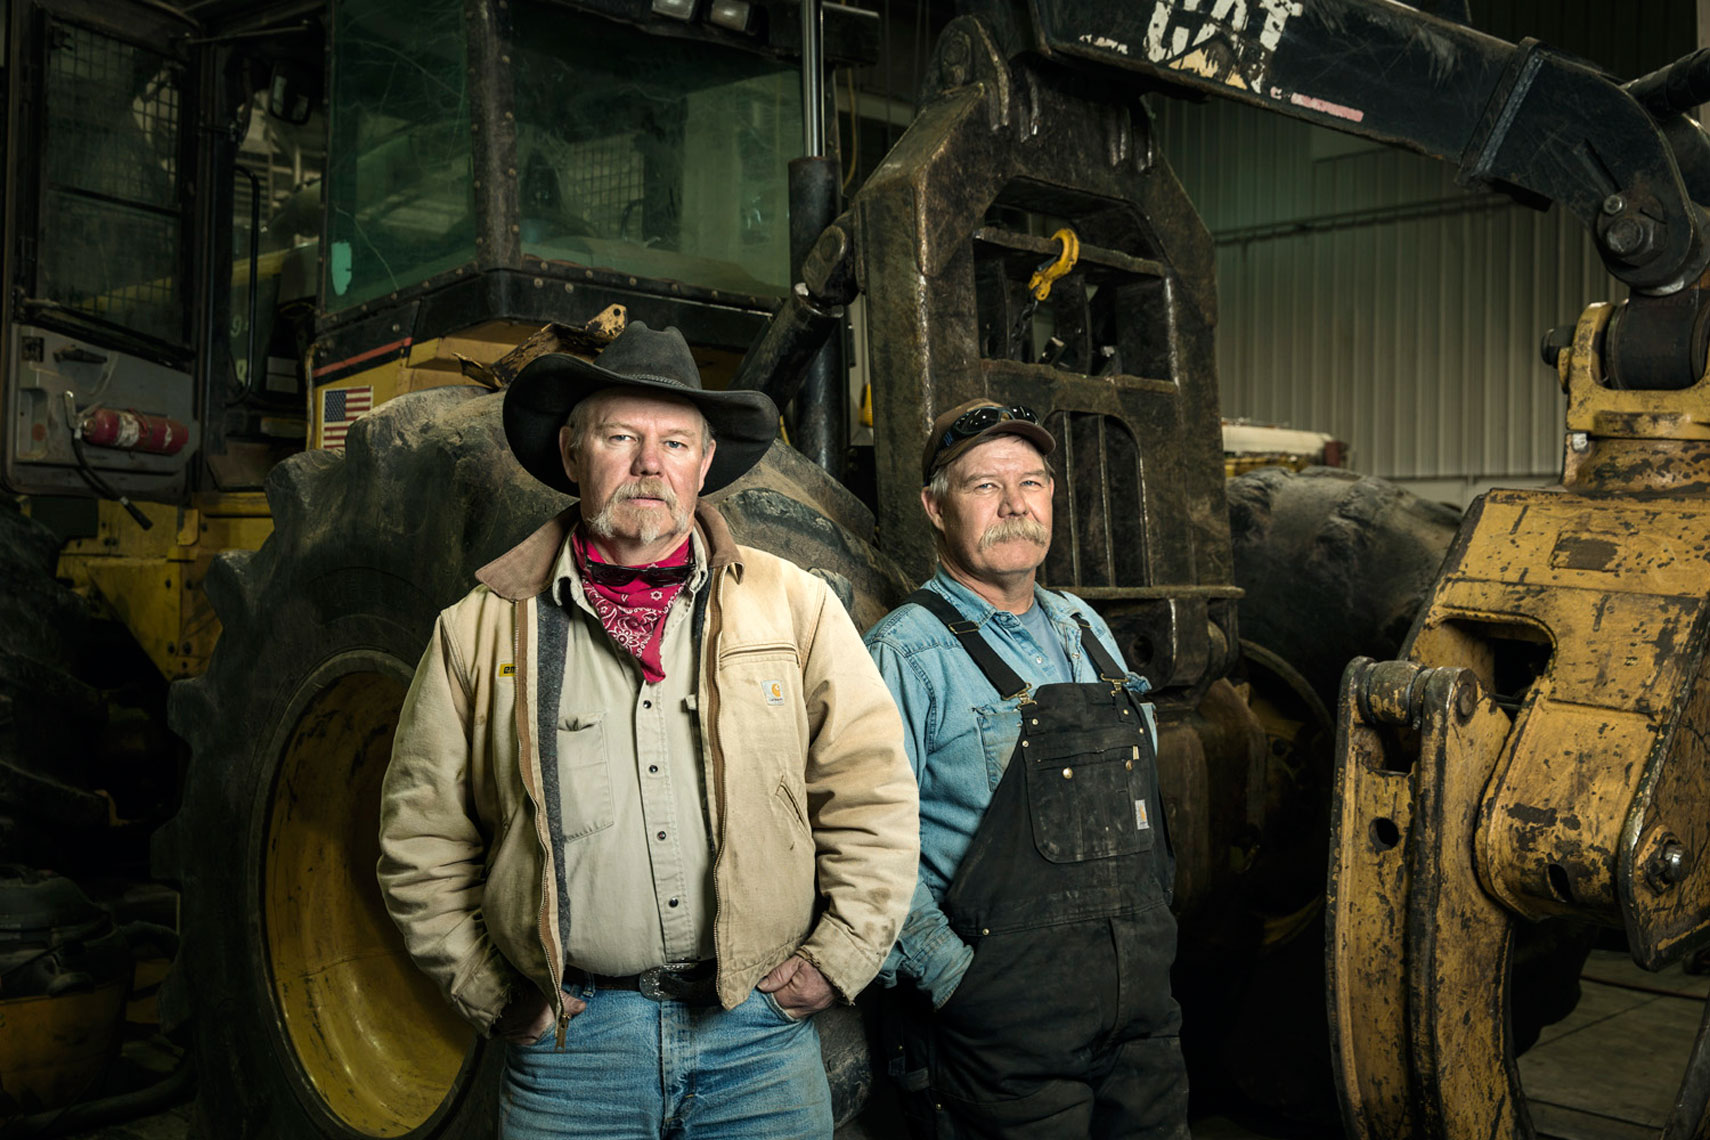 Nature Conservancy: The Loggers. SPREAD 3: RICK AND DALE WALKER